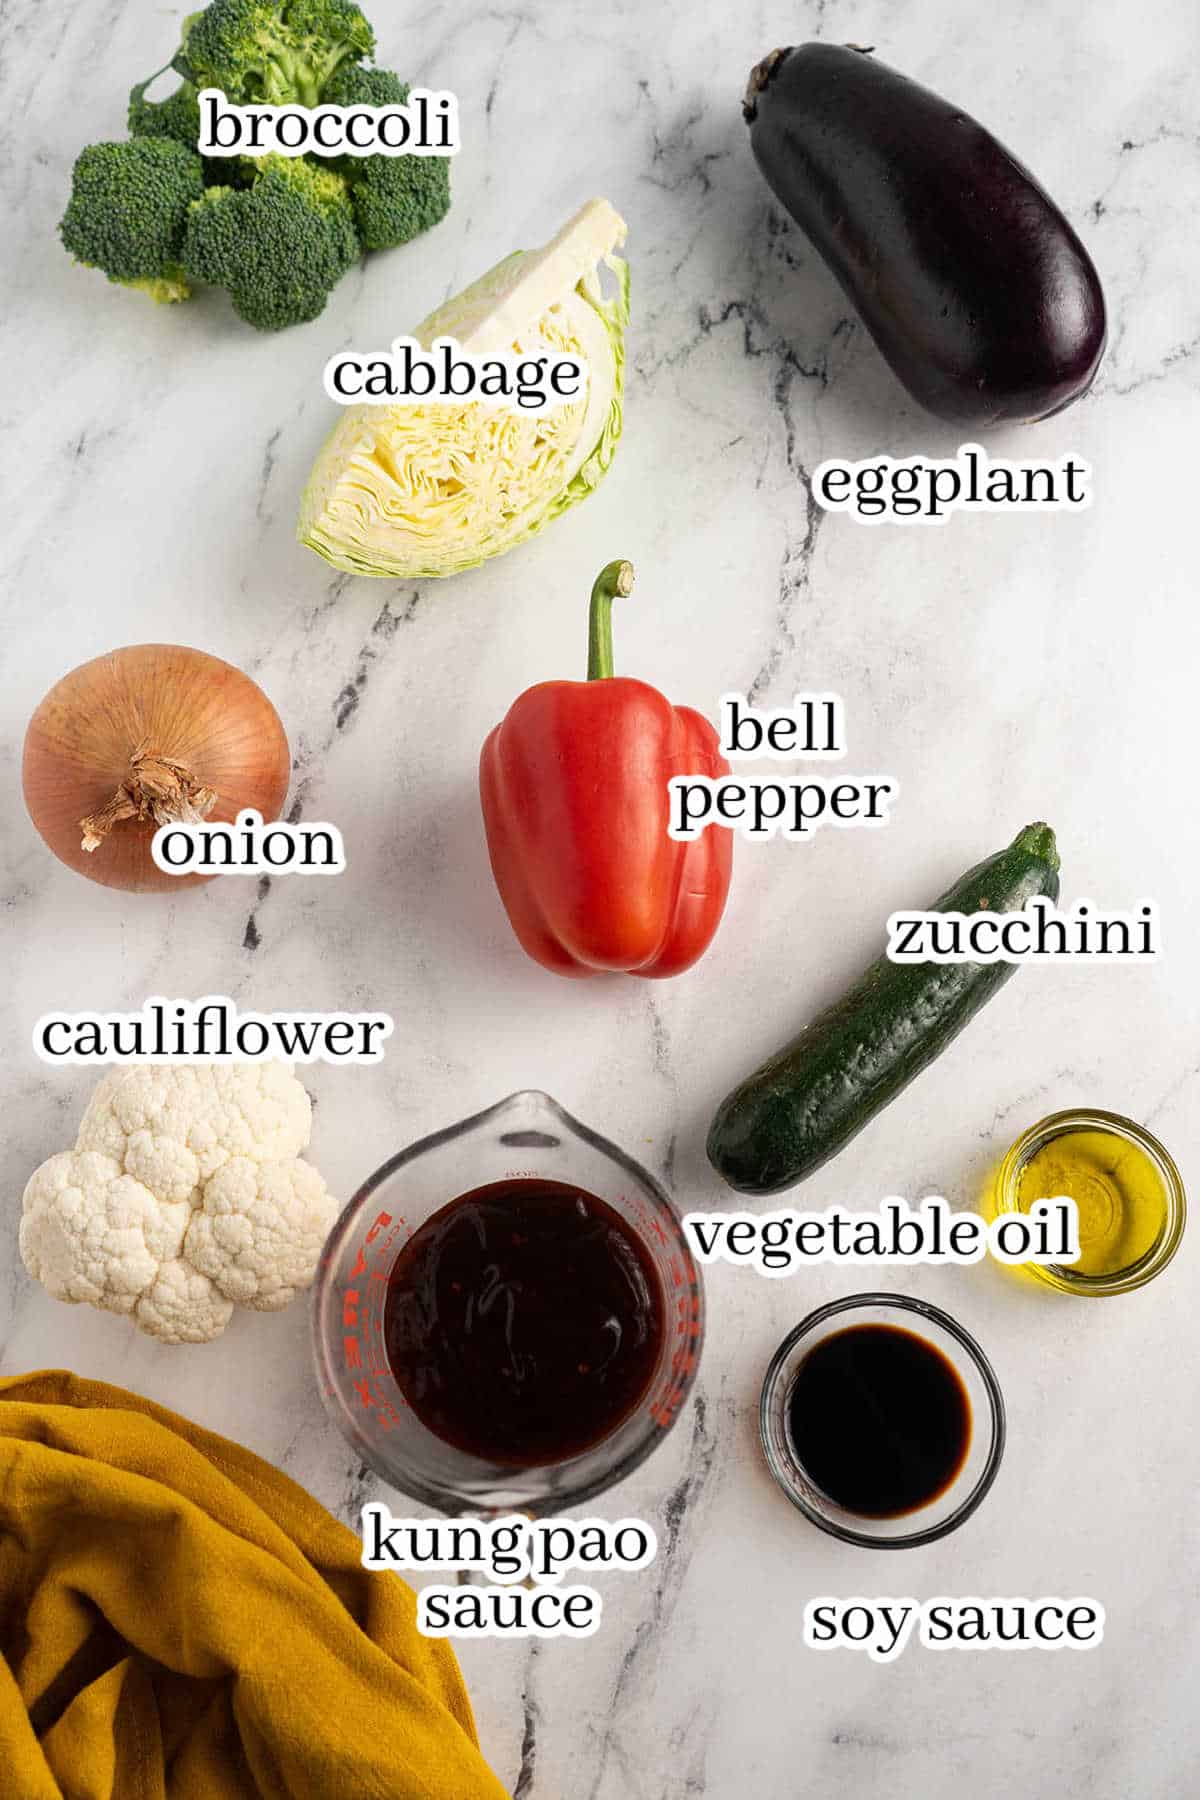 Ingredients to make the stir-fry vegetables. With print overlay for clarification.